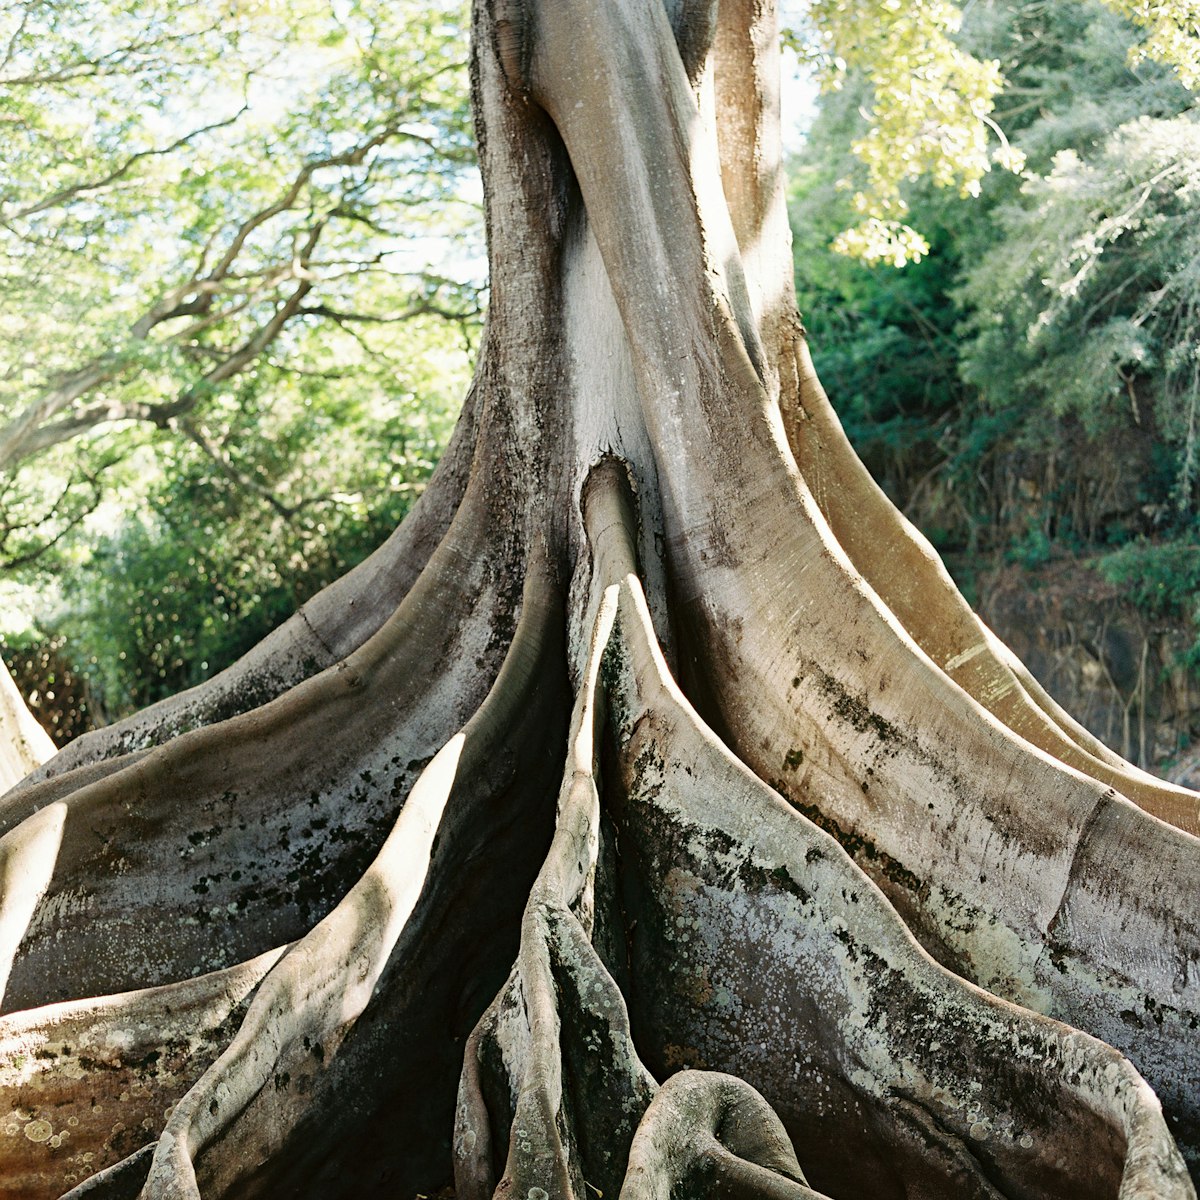 Lonely Planet Magazine, Issue 123, March 2019, Hawaii, trunk, flora
The Moreton Bay fig trees in Allerton Garden were film backdrops in Jurassic Park.